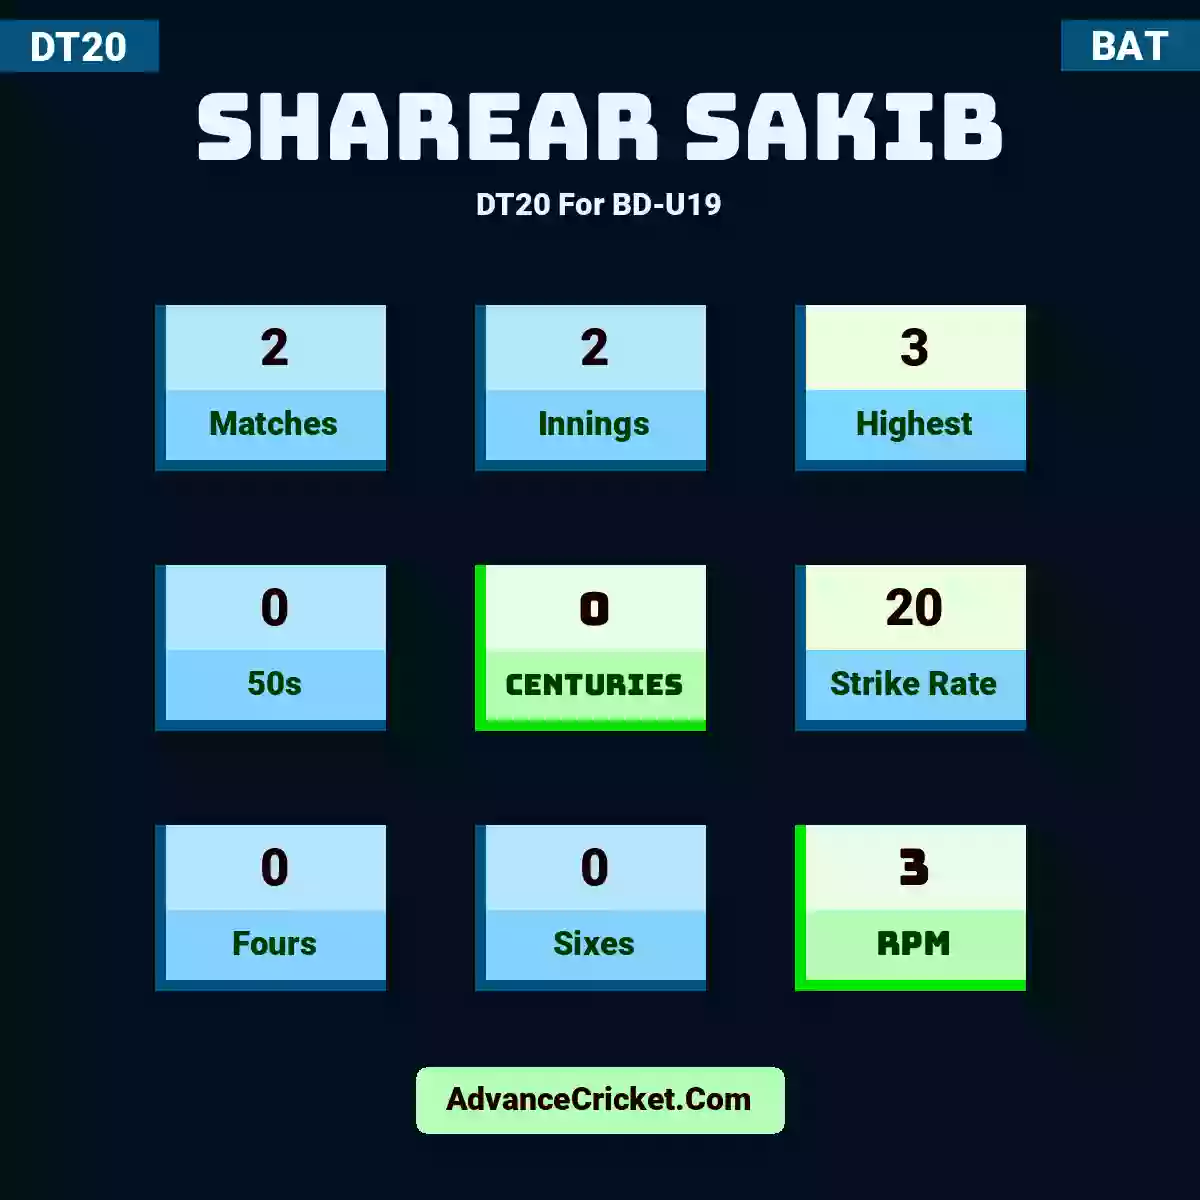 Sharear Sakib DT20  For BD-U19, Sharear Sakib played 2 matches, scored 3 runs as highest, 0 half-centuries, and 0 centuries, with a strike rate of 20. S.Sakib hit 0 fours and 0 sixes, with an RPM of 3.